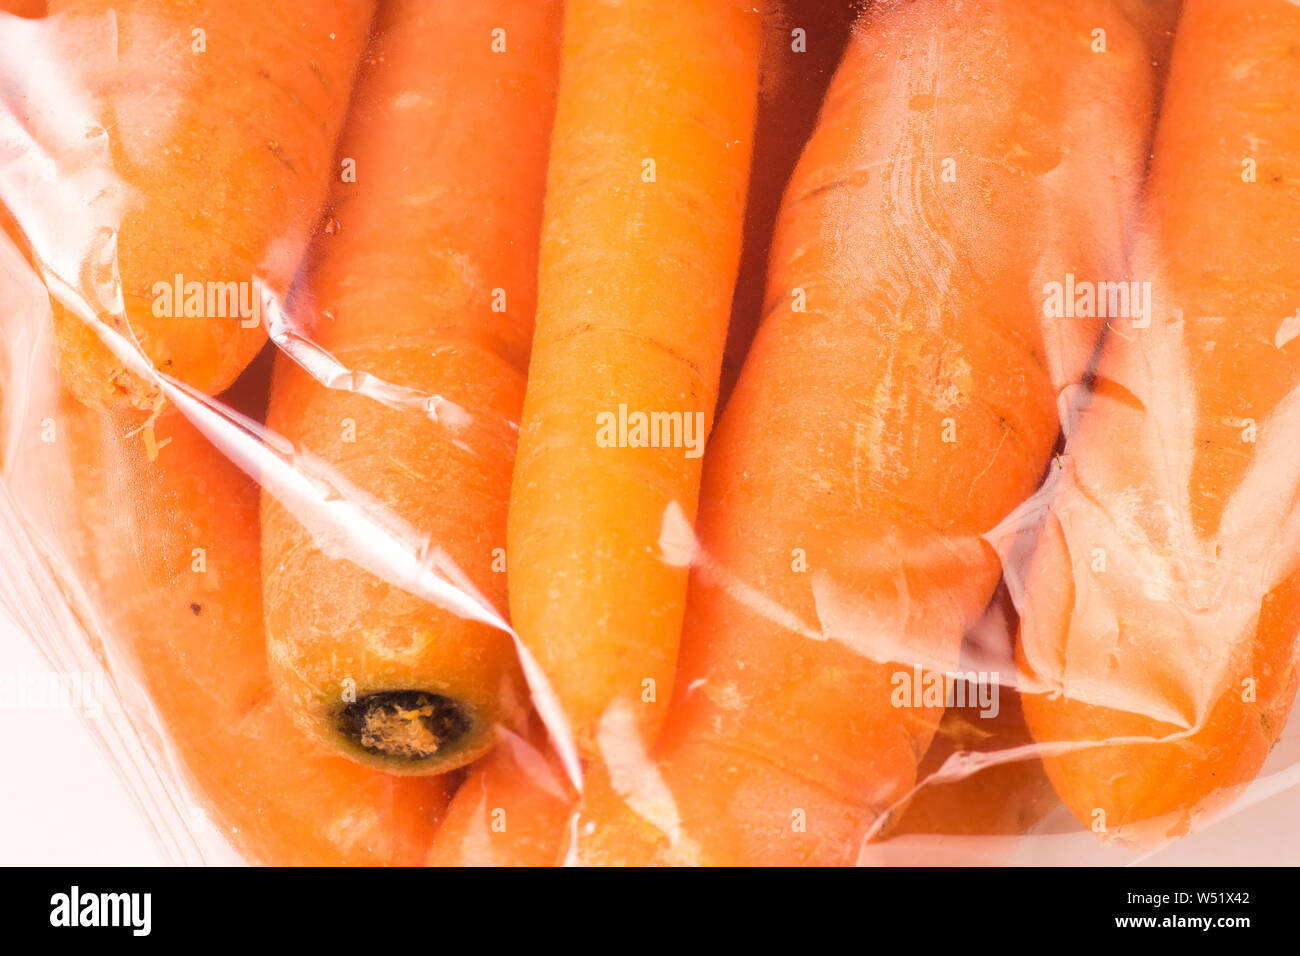 Bunch of organic Carrots packaged in plastic bag Stock Photo